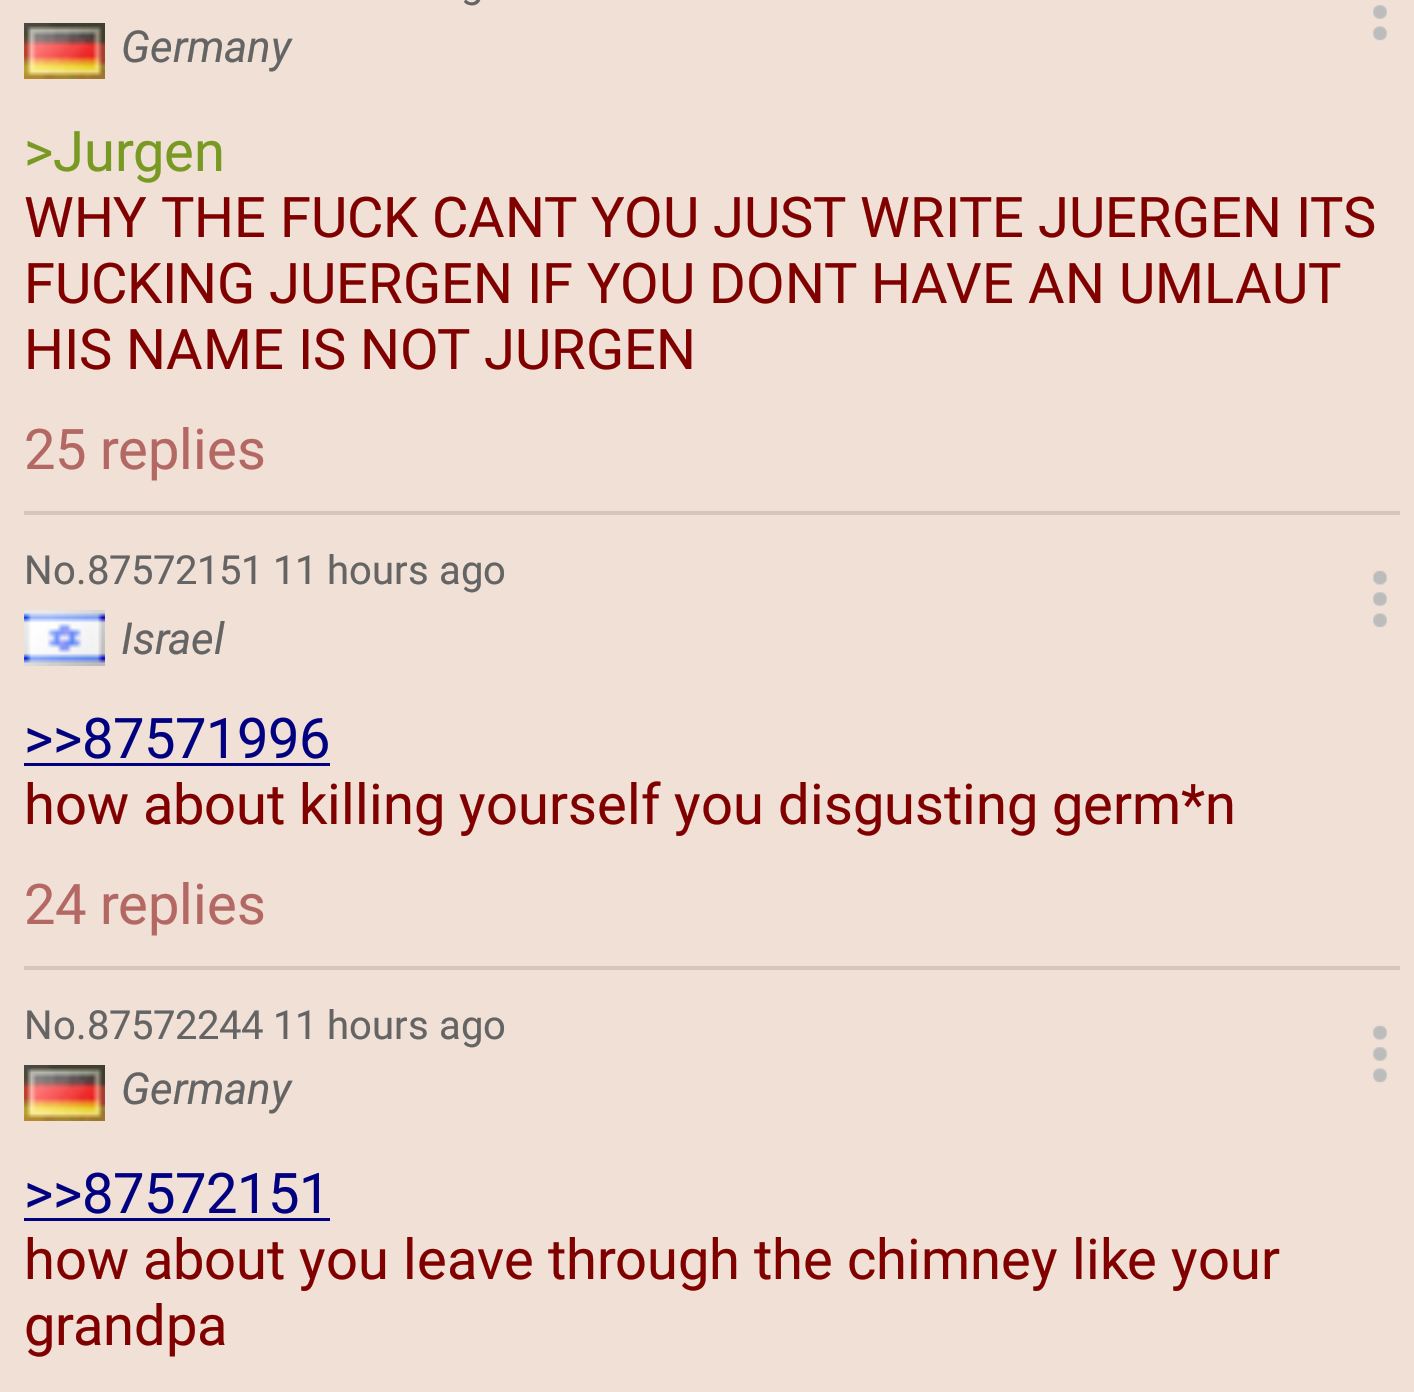 document - Germany >Jurgen Why The Fuck Cant You Just Write Juergen Its Fucking Juergen If You Dont Have An Umlaut His Name Is Not Jurgen | 25 replies No.87572151 11 hours ago Israel >>87571996 how about killing yourself you disgusting germn 24 replies No